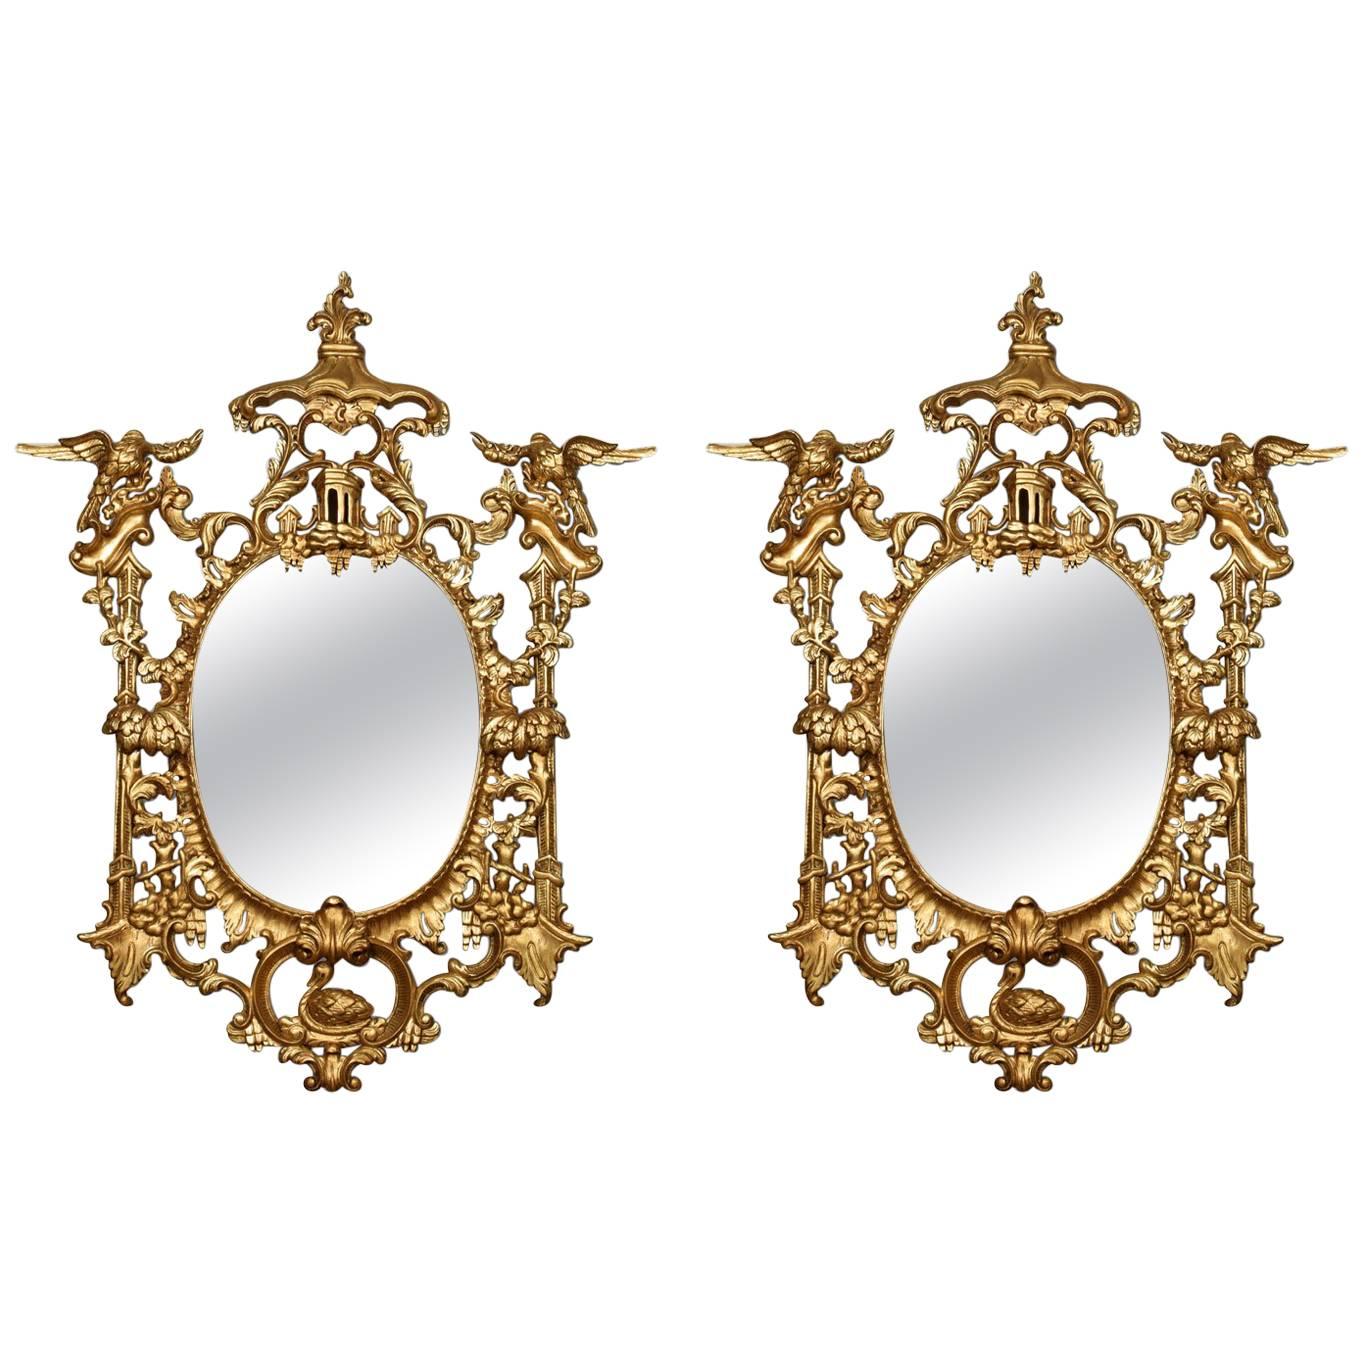 Pair of Substantial Chinese Chippendale Style Giltwood Mirrors